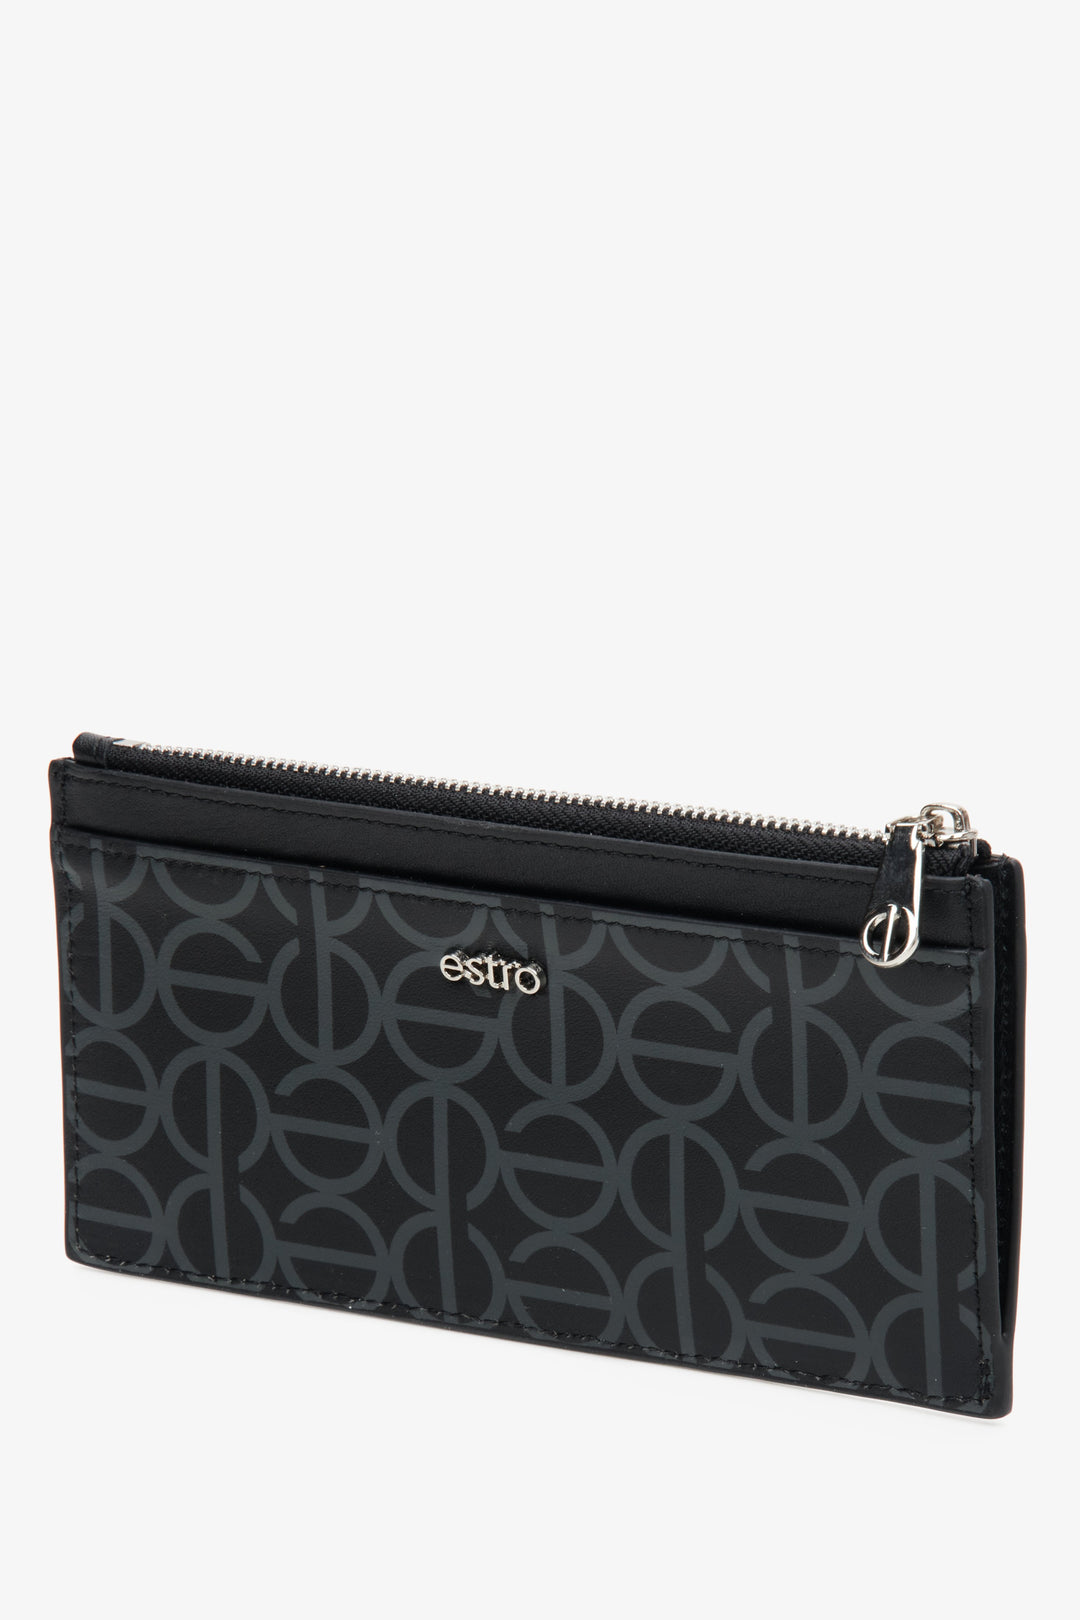 Stylish, large, women's black wristlet by Estro, made of genuine leather with silver accents.